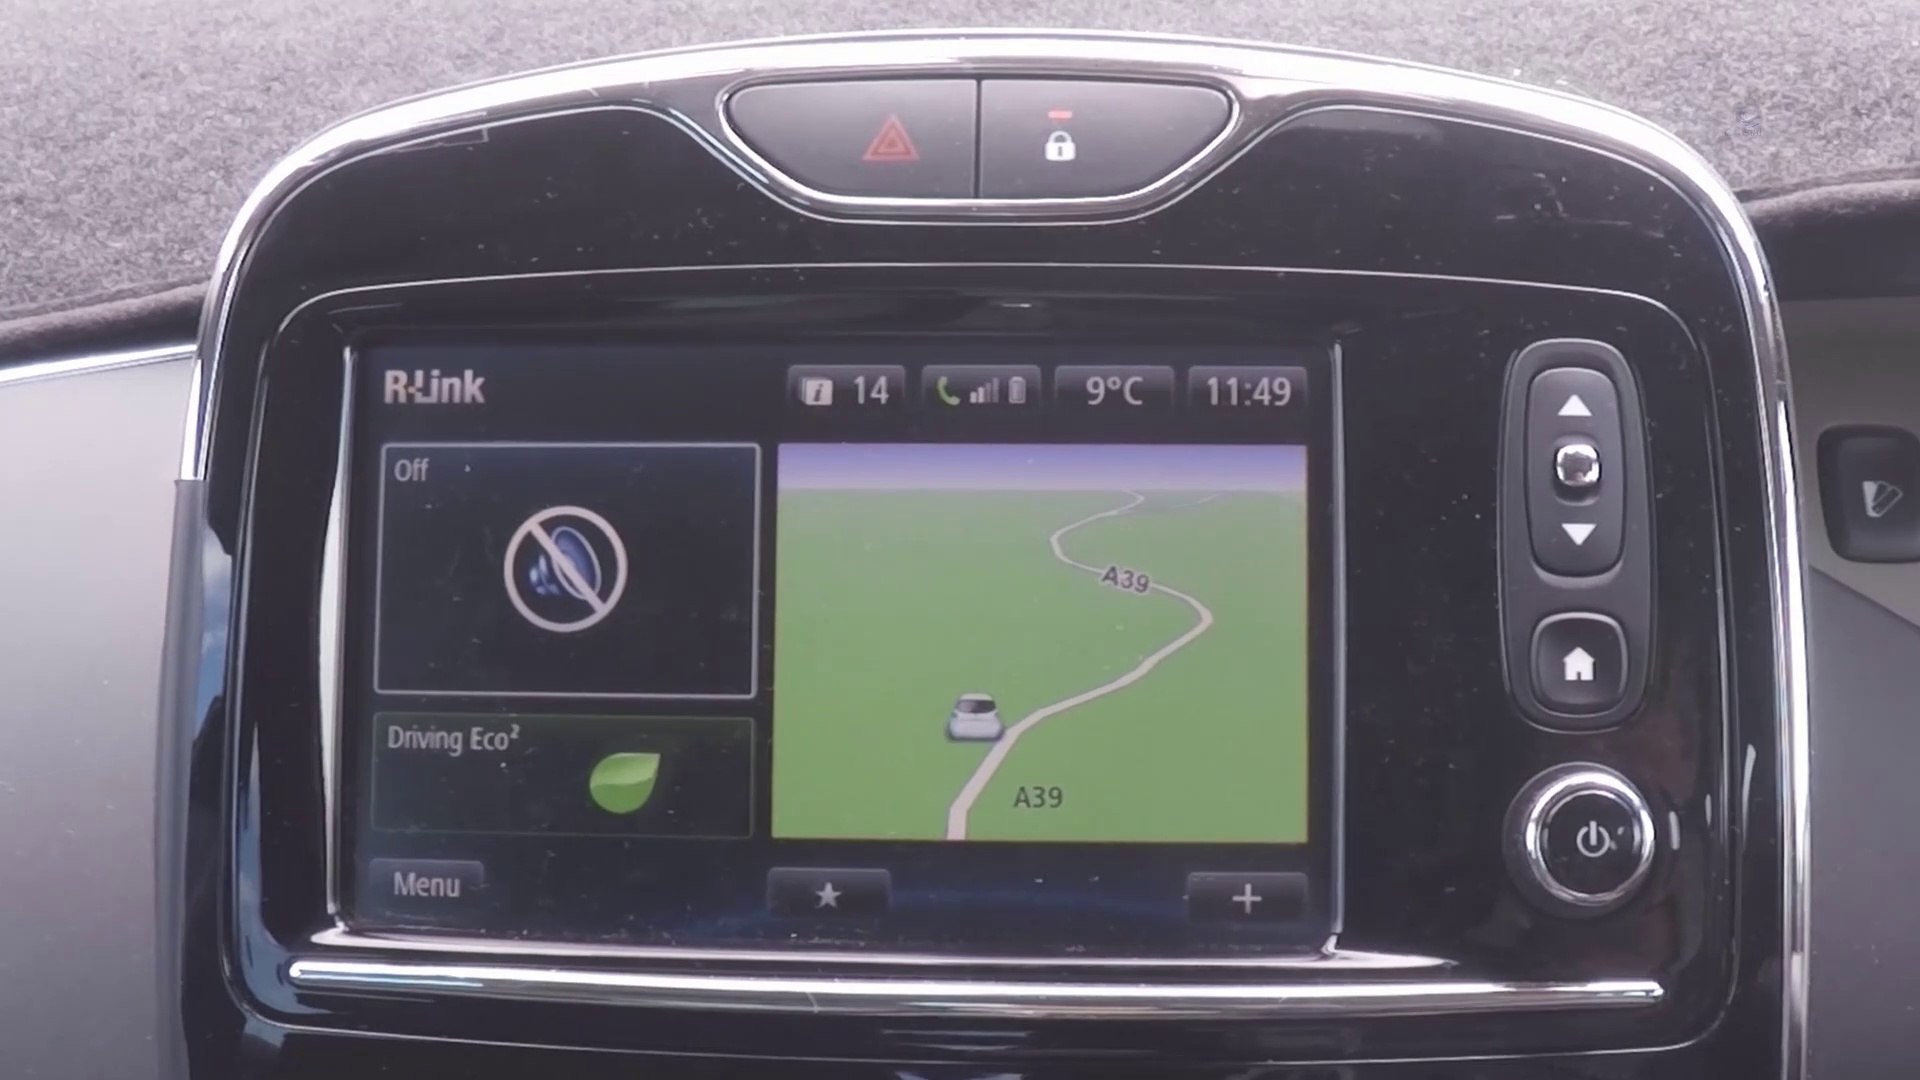 Renault - How to Reset R-Link - video Dailymotion